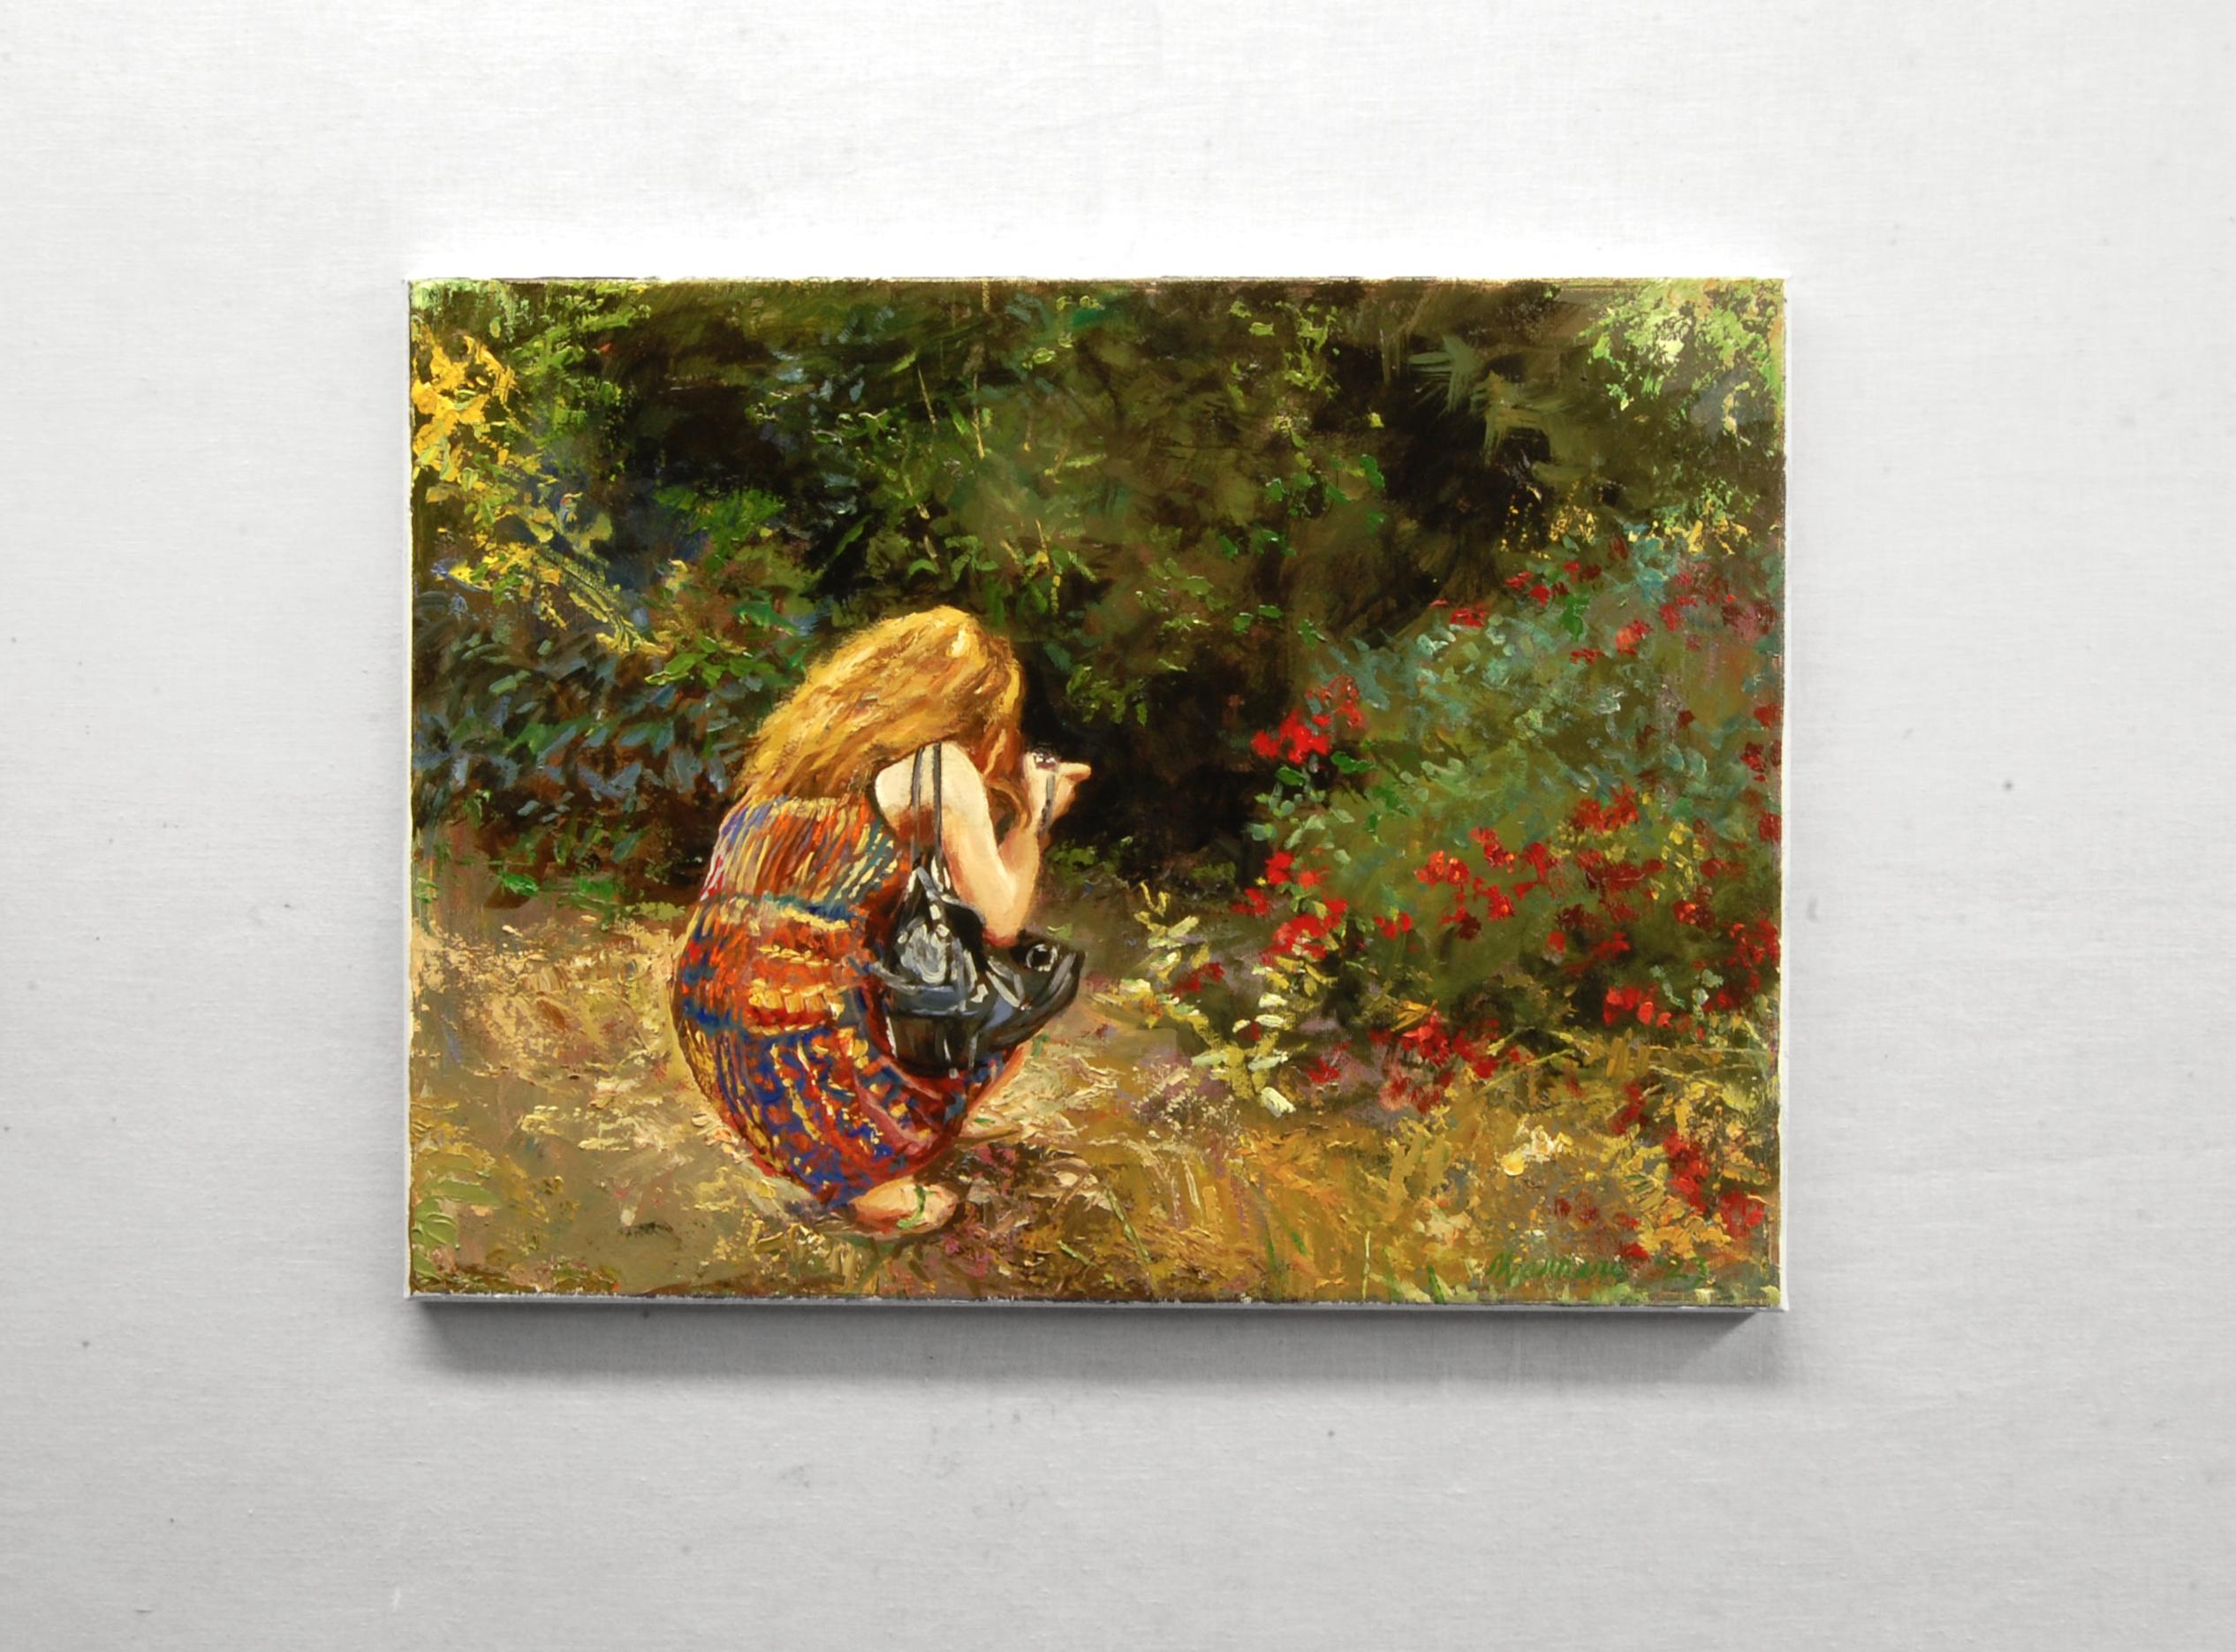 <p>Artist Comments<br>Artist Onelio Marrero portrays his youngest daughter, a photographer, capturing the beauty of nature at the Morris County Arboretum in New Jersey. The painting features exquisite textures made with skillful brushwork and